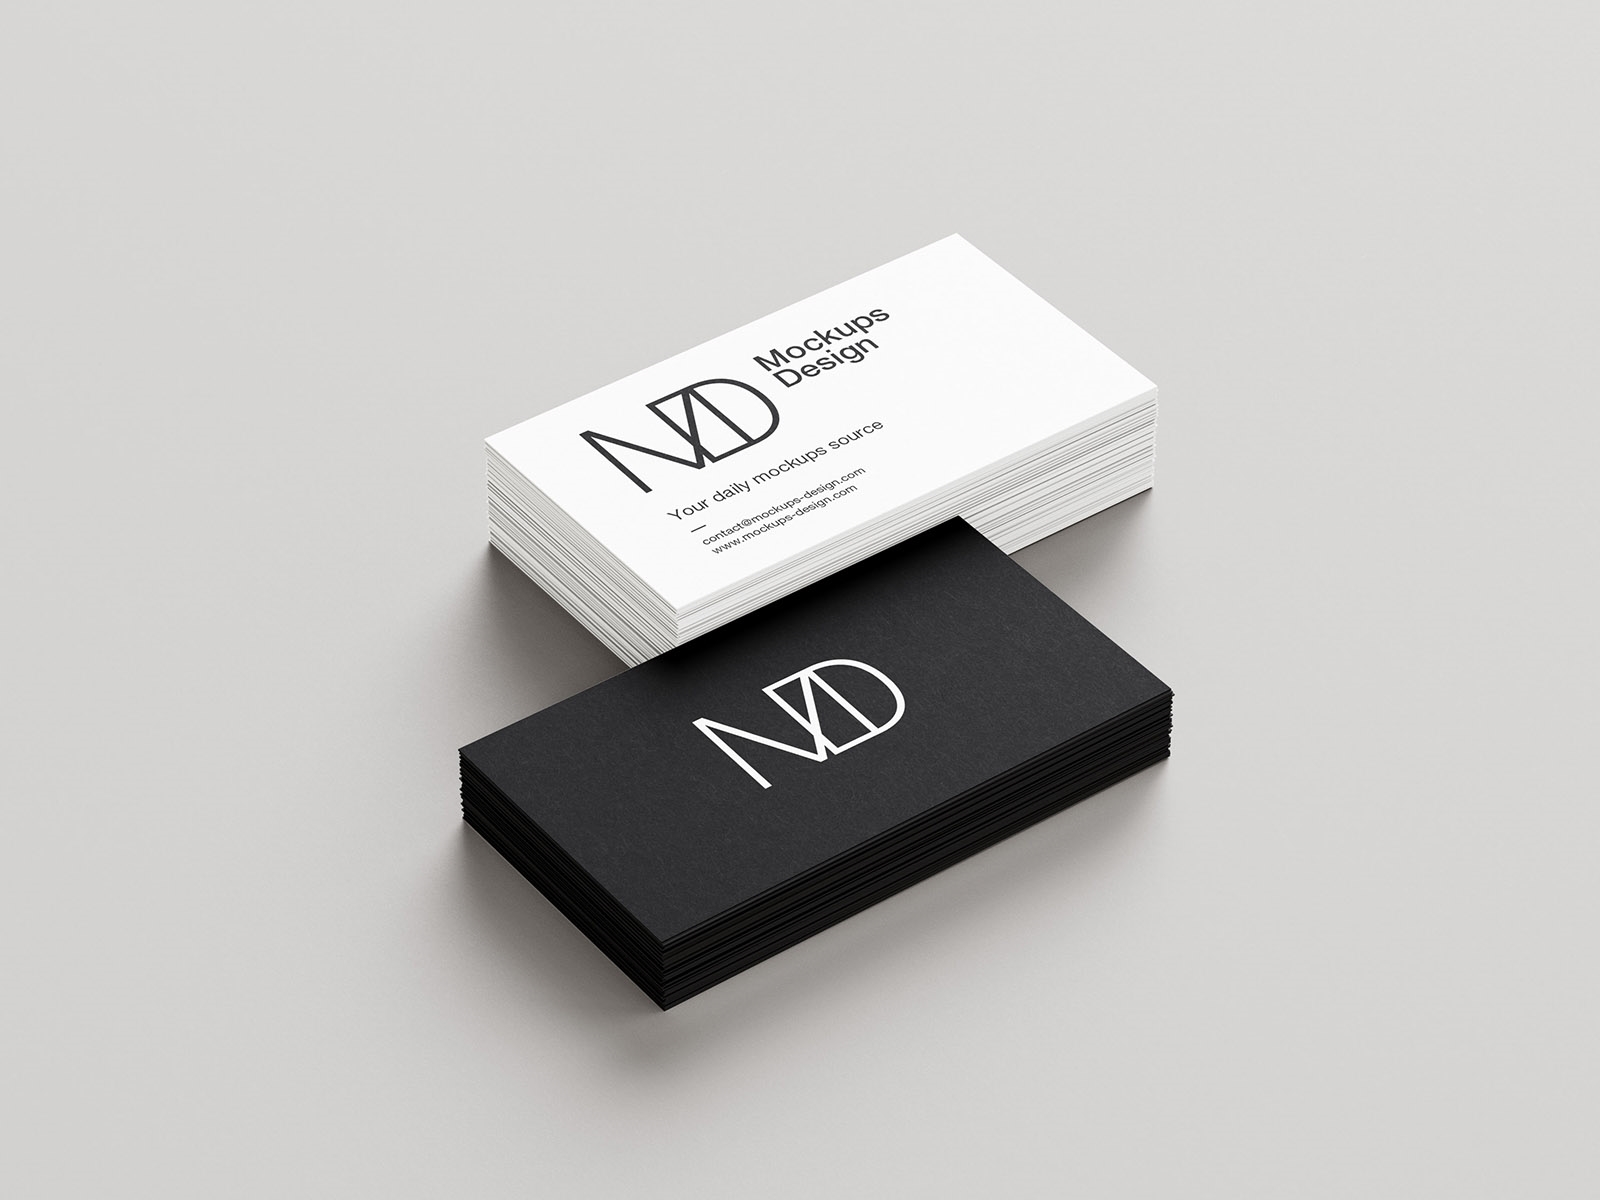 5 Mockups of Business Cards in Stacks in Different Angles FREE PSD